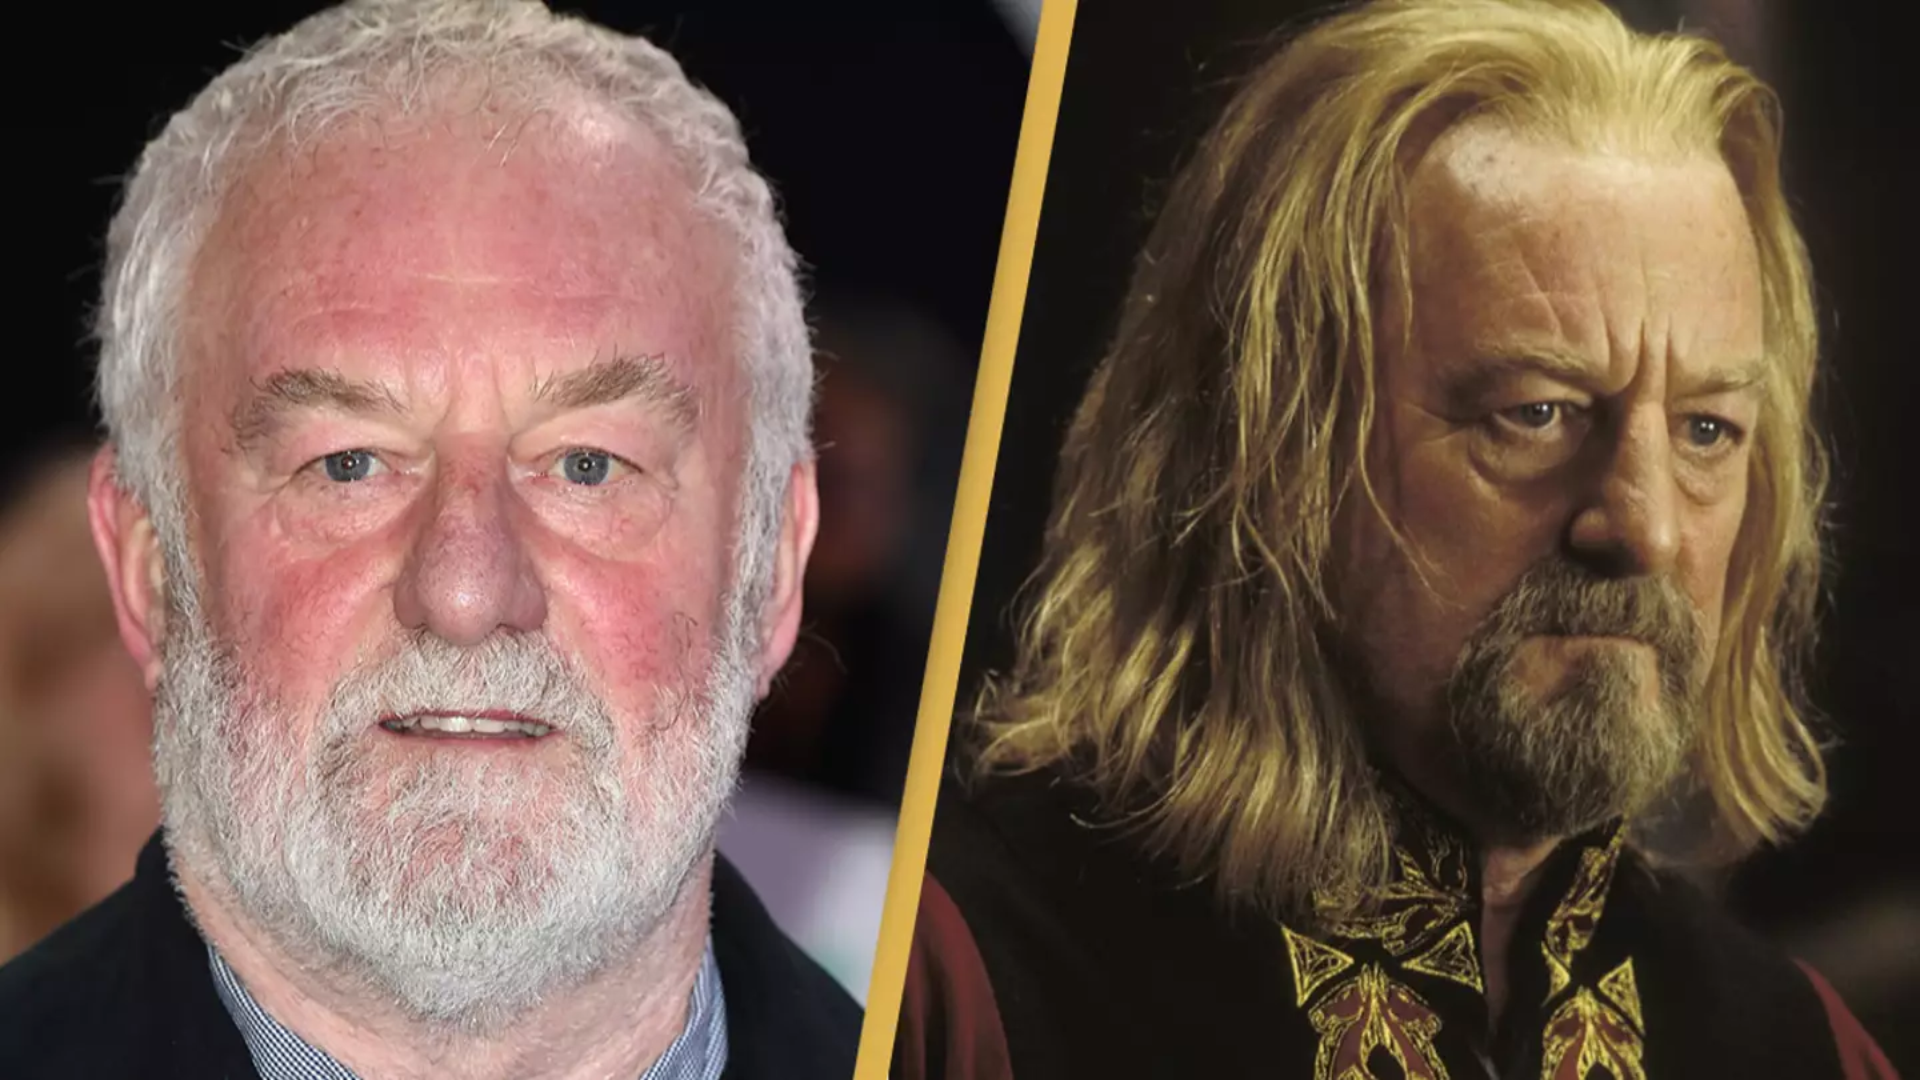 Renowned actor Bernard Hill, celebrated for his memorable performances in blockbuster films like Titanic and The Lord of the Rings trilogy, has passed away at the age of 79.